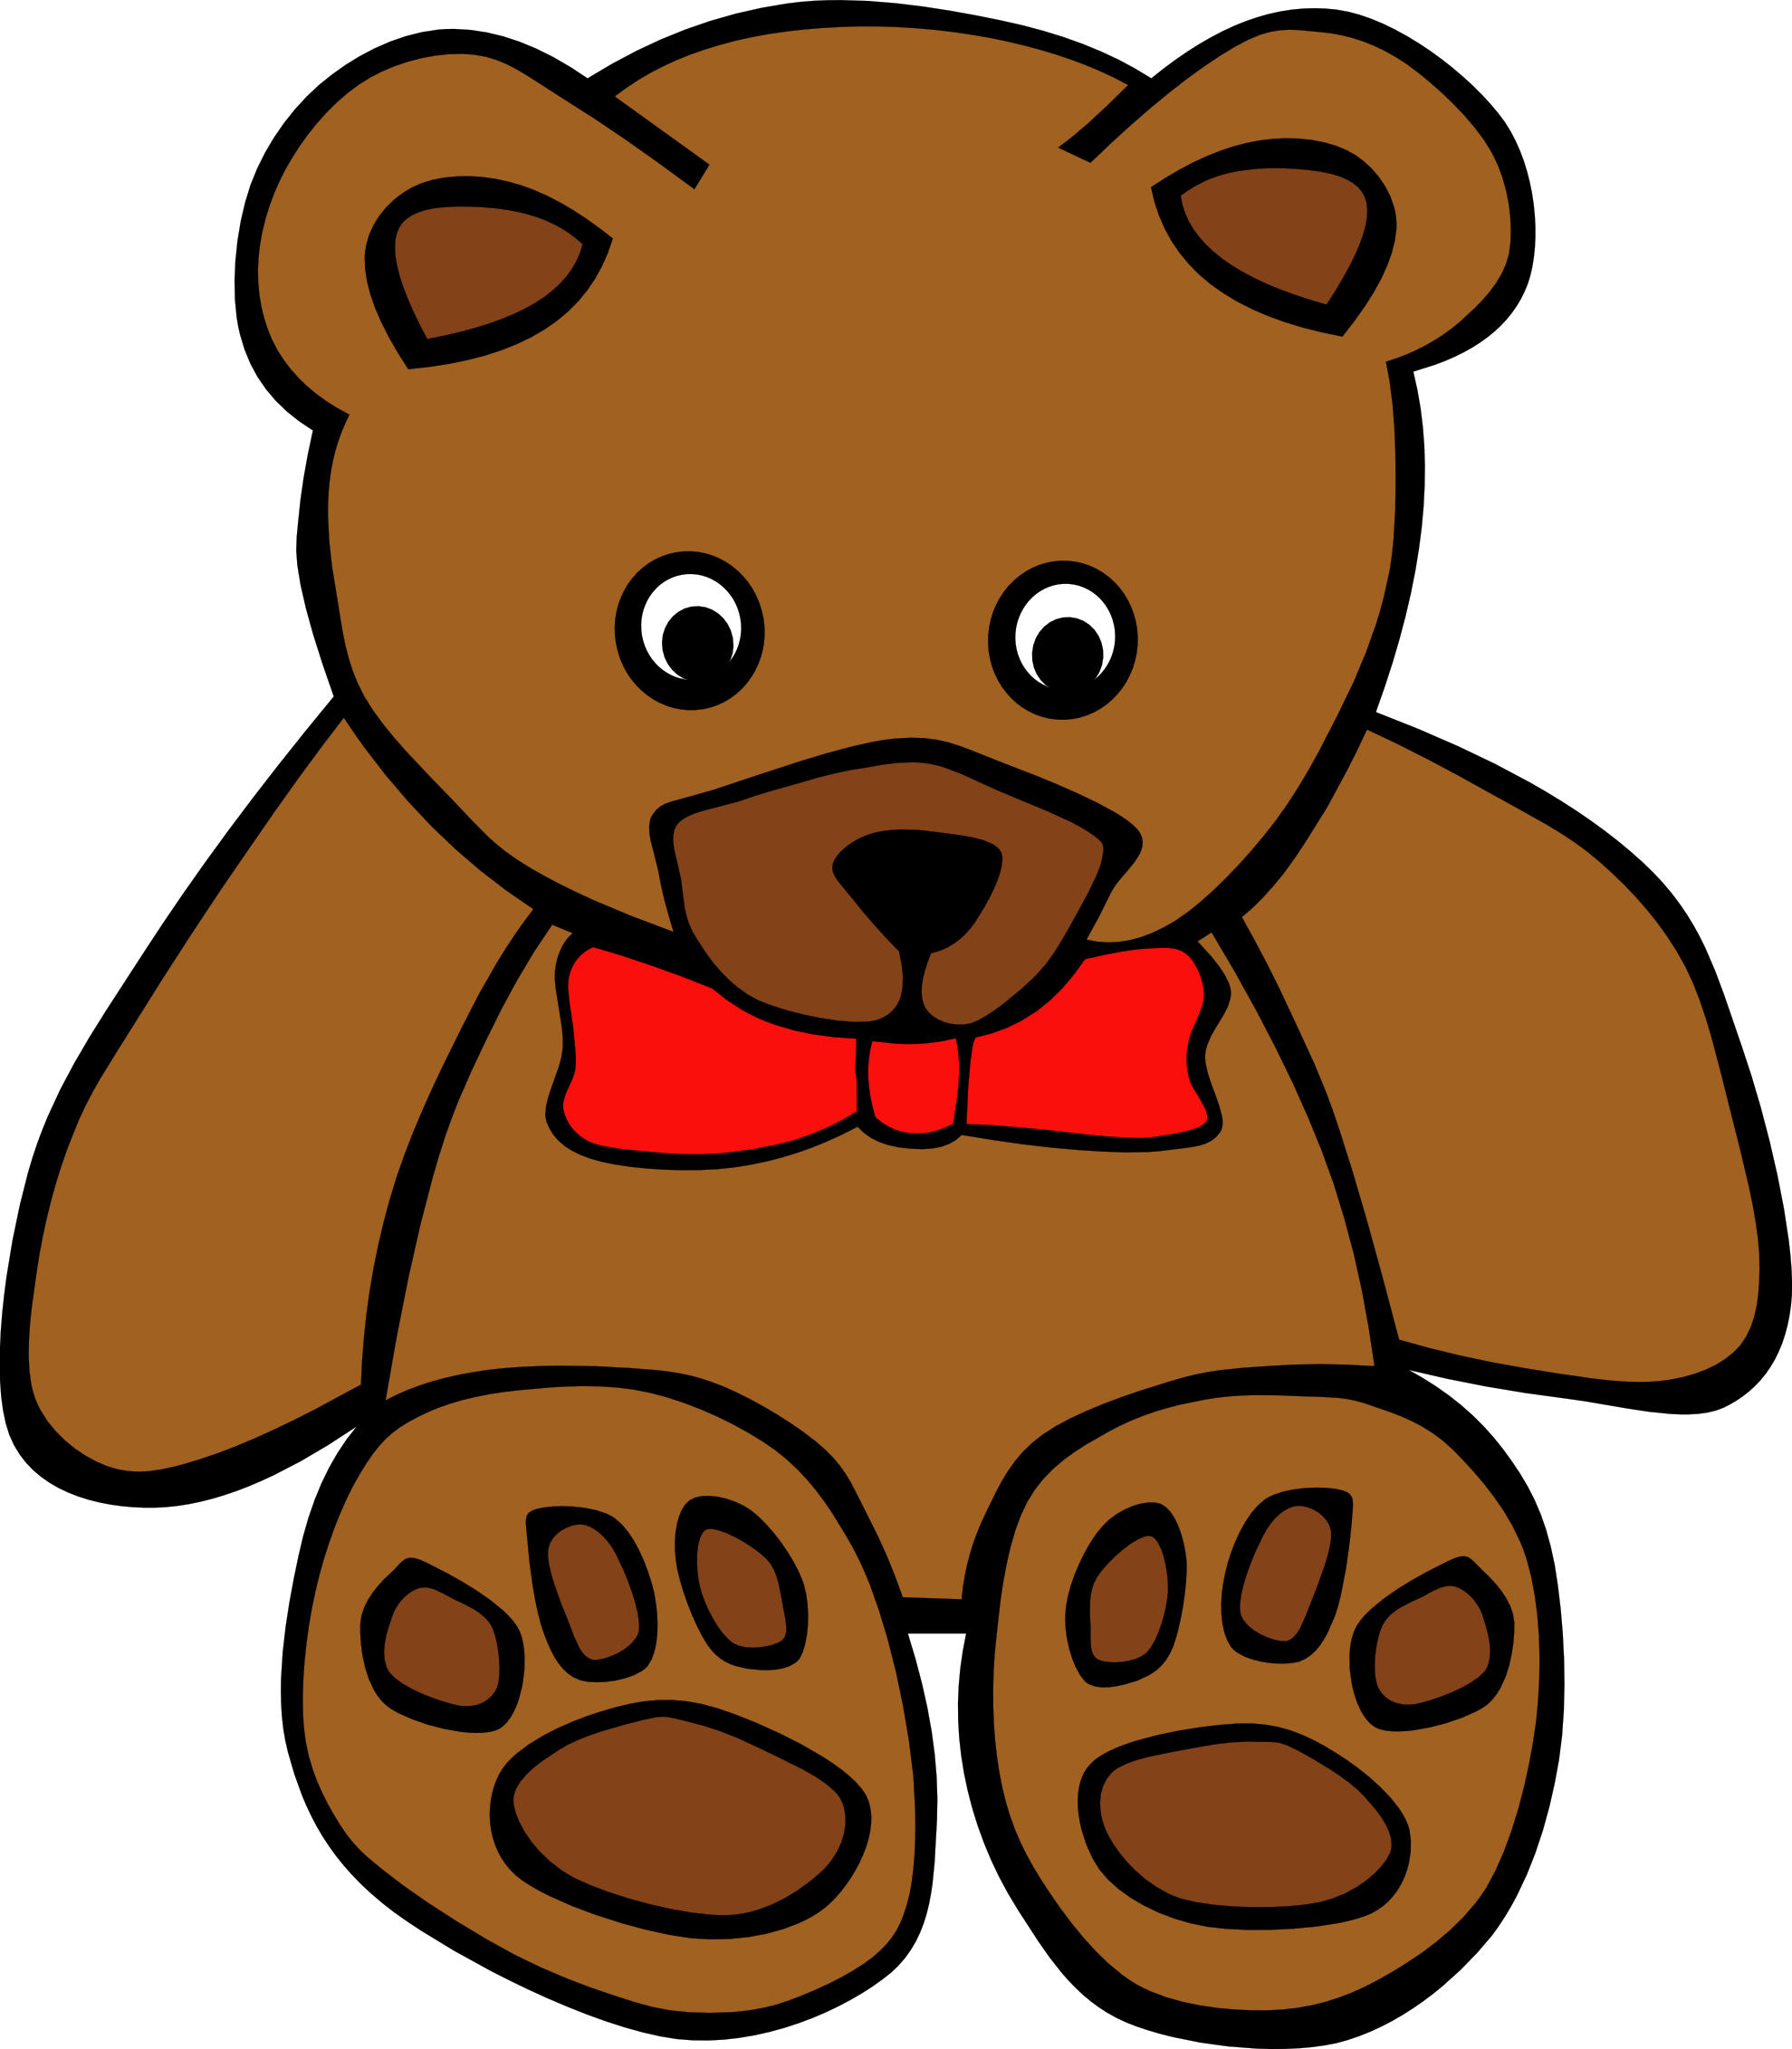 Teddy bear clipart free clipart images 4